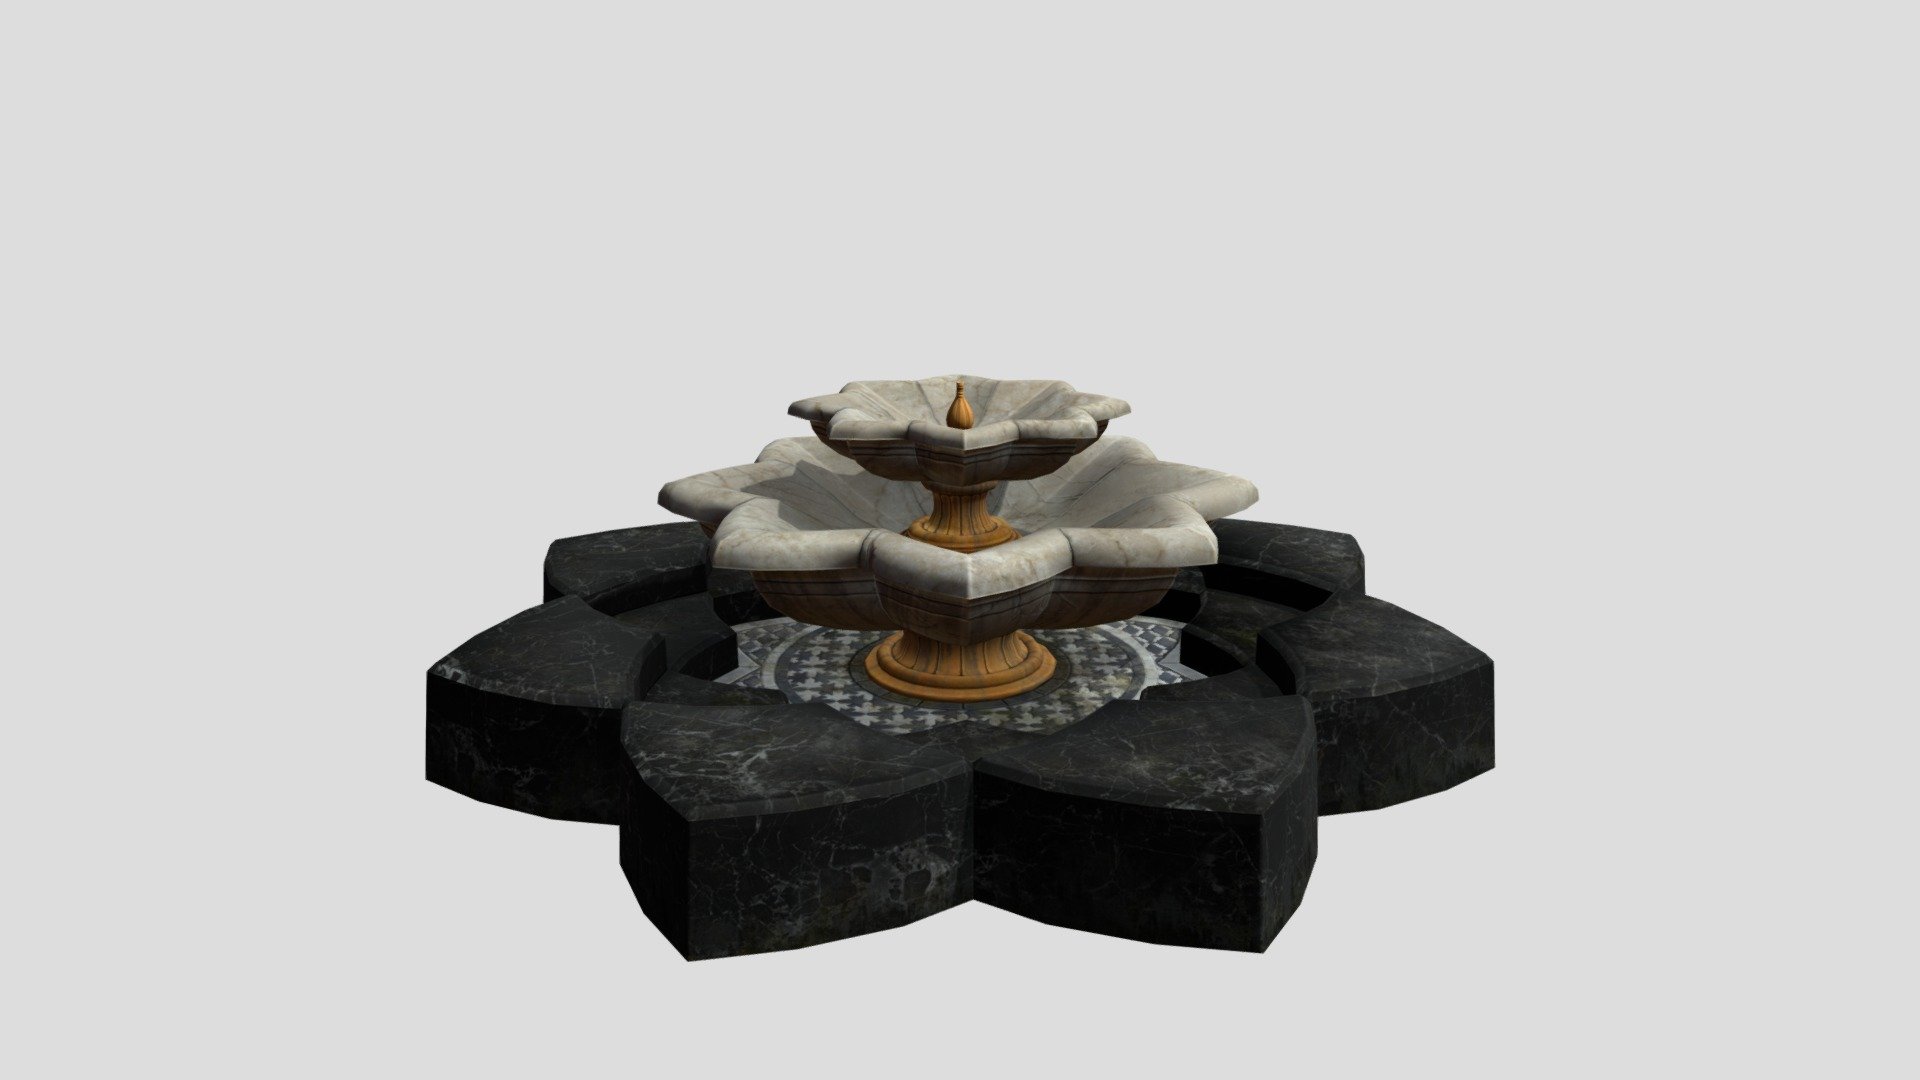 3D Fountain
The pack has highly detailed fountain ready for use in your project. Just drag and drop prefab into your scene and achieve beautiful results in no time. Available formats FBX, 3DS Max 2017



We are here to empower the creators. Please contact us via the [Contact US](https://aaanimators.com/#contact-area) page if you are having issues with our assets. 




The following document provides a highly detailed description of the asset:
[READ ME]()




**Mesh complexities:**


Fountain_06 2946 verts; 4172 tris



Includes 1 sets of textures with 4 materials:



● Diffuse

● Gloss

● Normal

● Specular - Fountain 06 - Buy Royalty Free 3D model by aaanimators 3d model